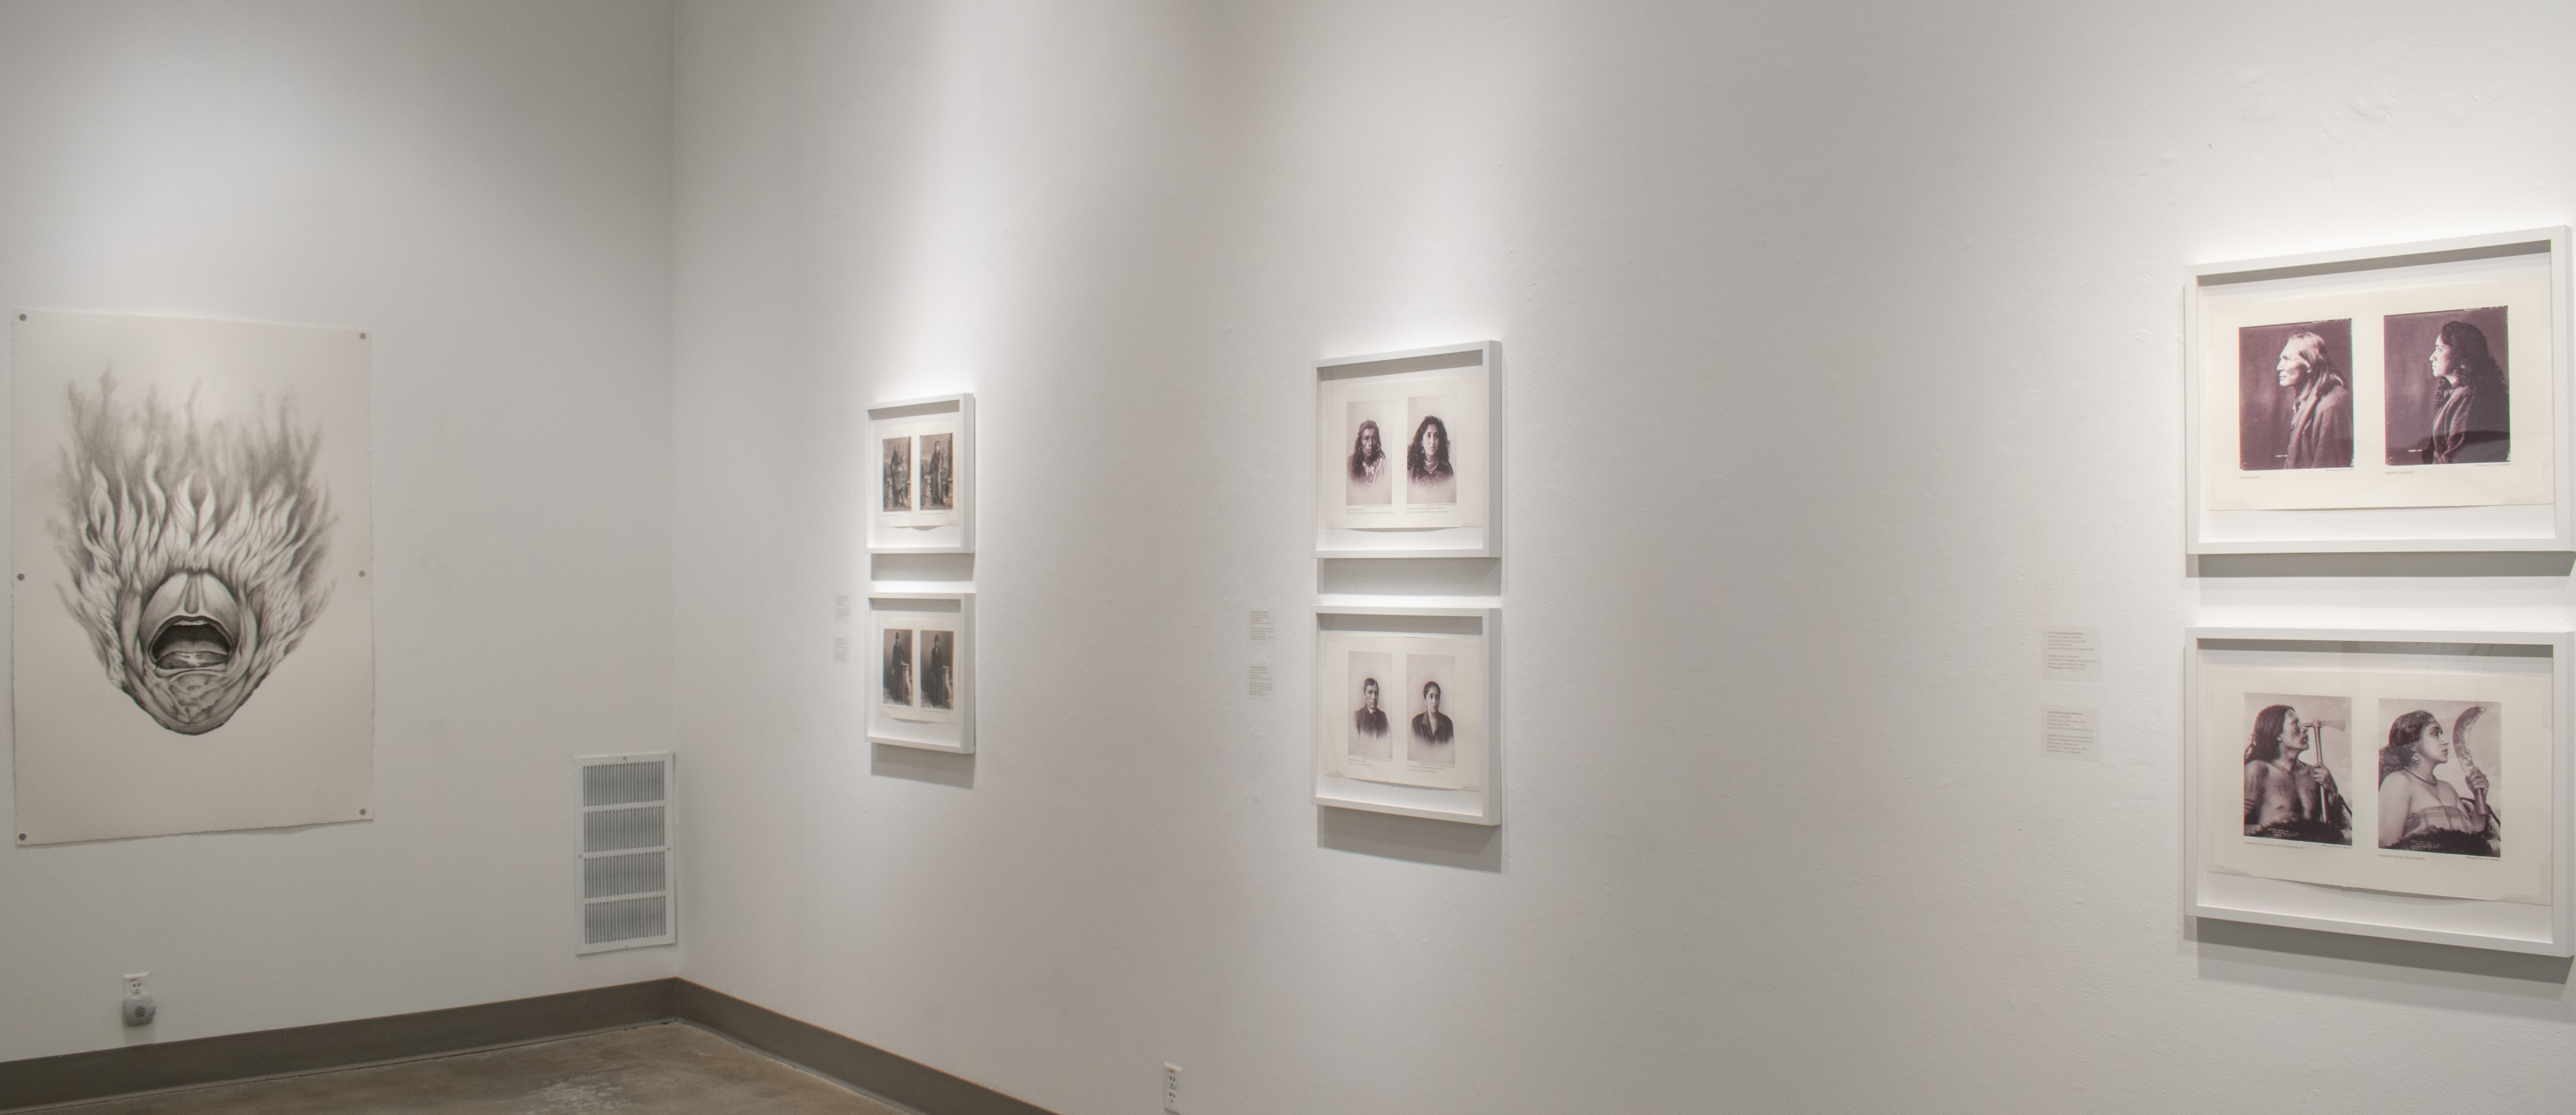 Installation View, Front West Gallery, Black, White & Shades of Grey Exhibition, Jan. 18, 2022 to Mar. 27, 2022.